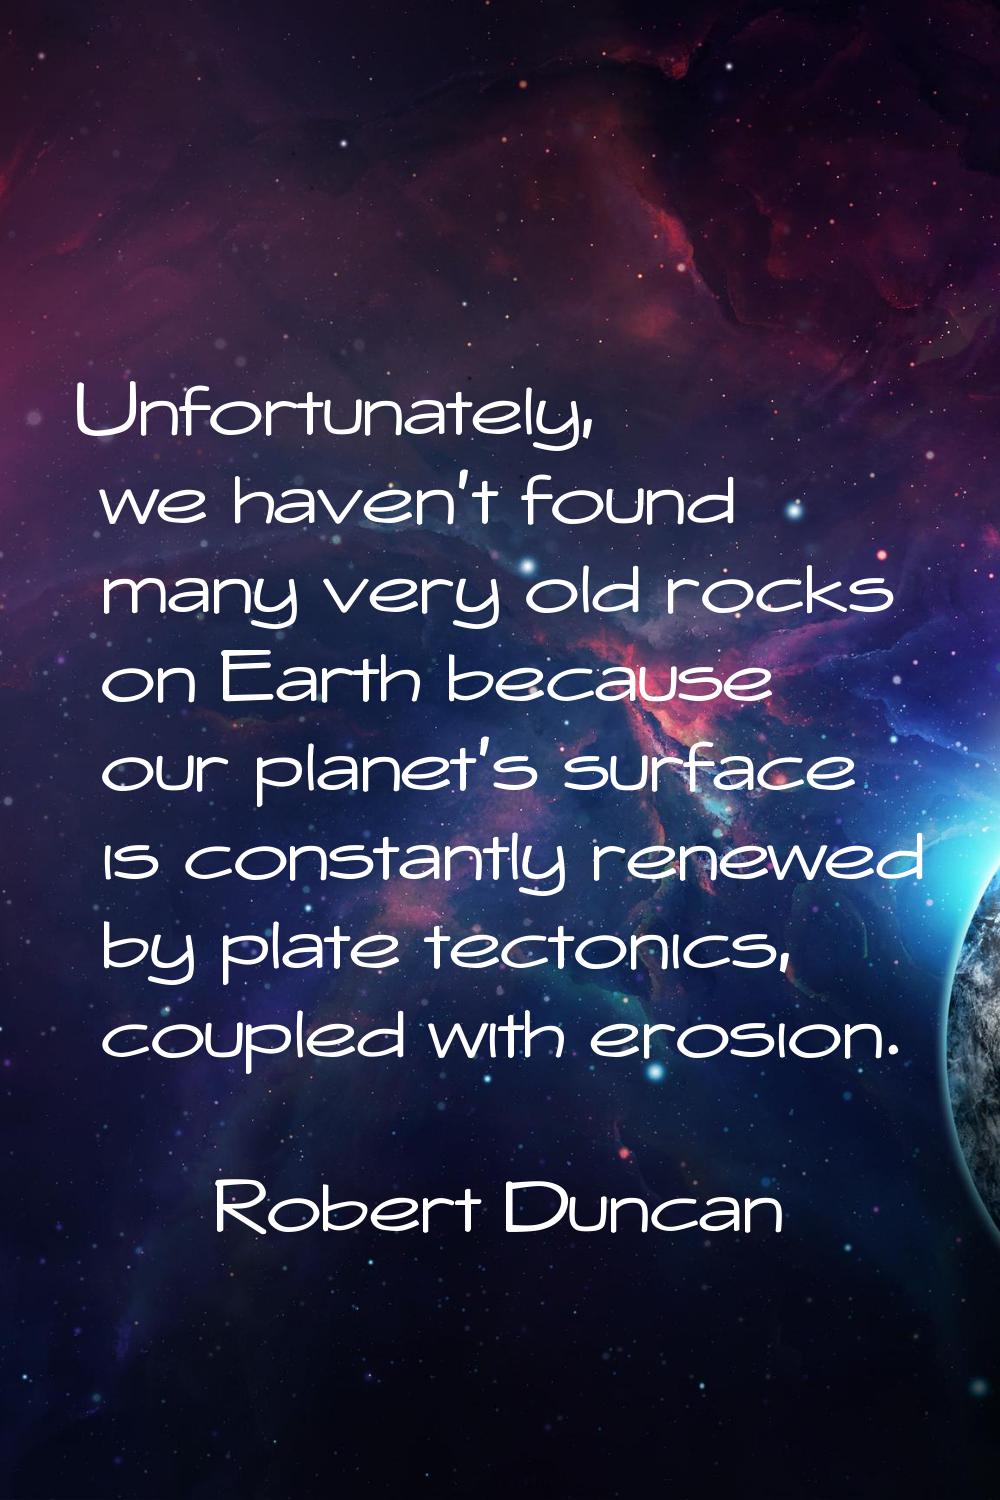 Unfortunately, we haven't found many very old rocks on Earth because our planet's surface is consta